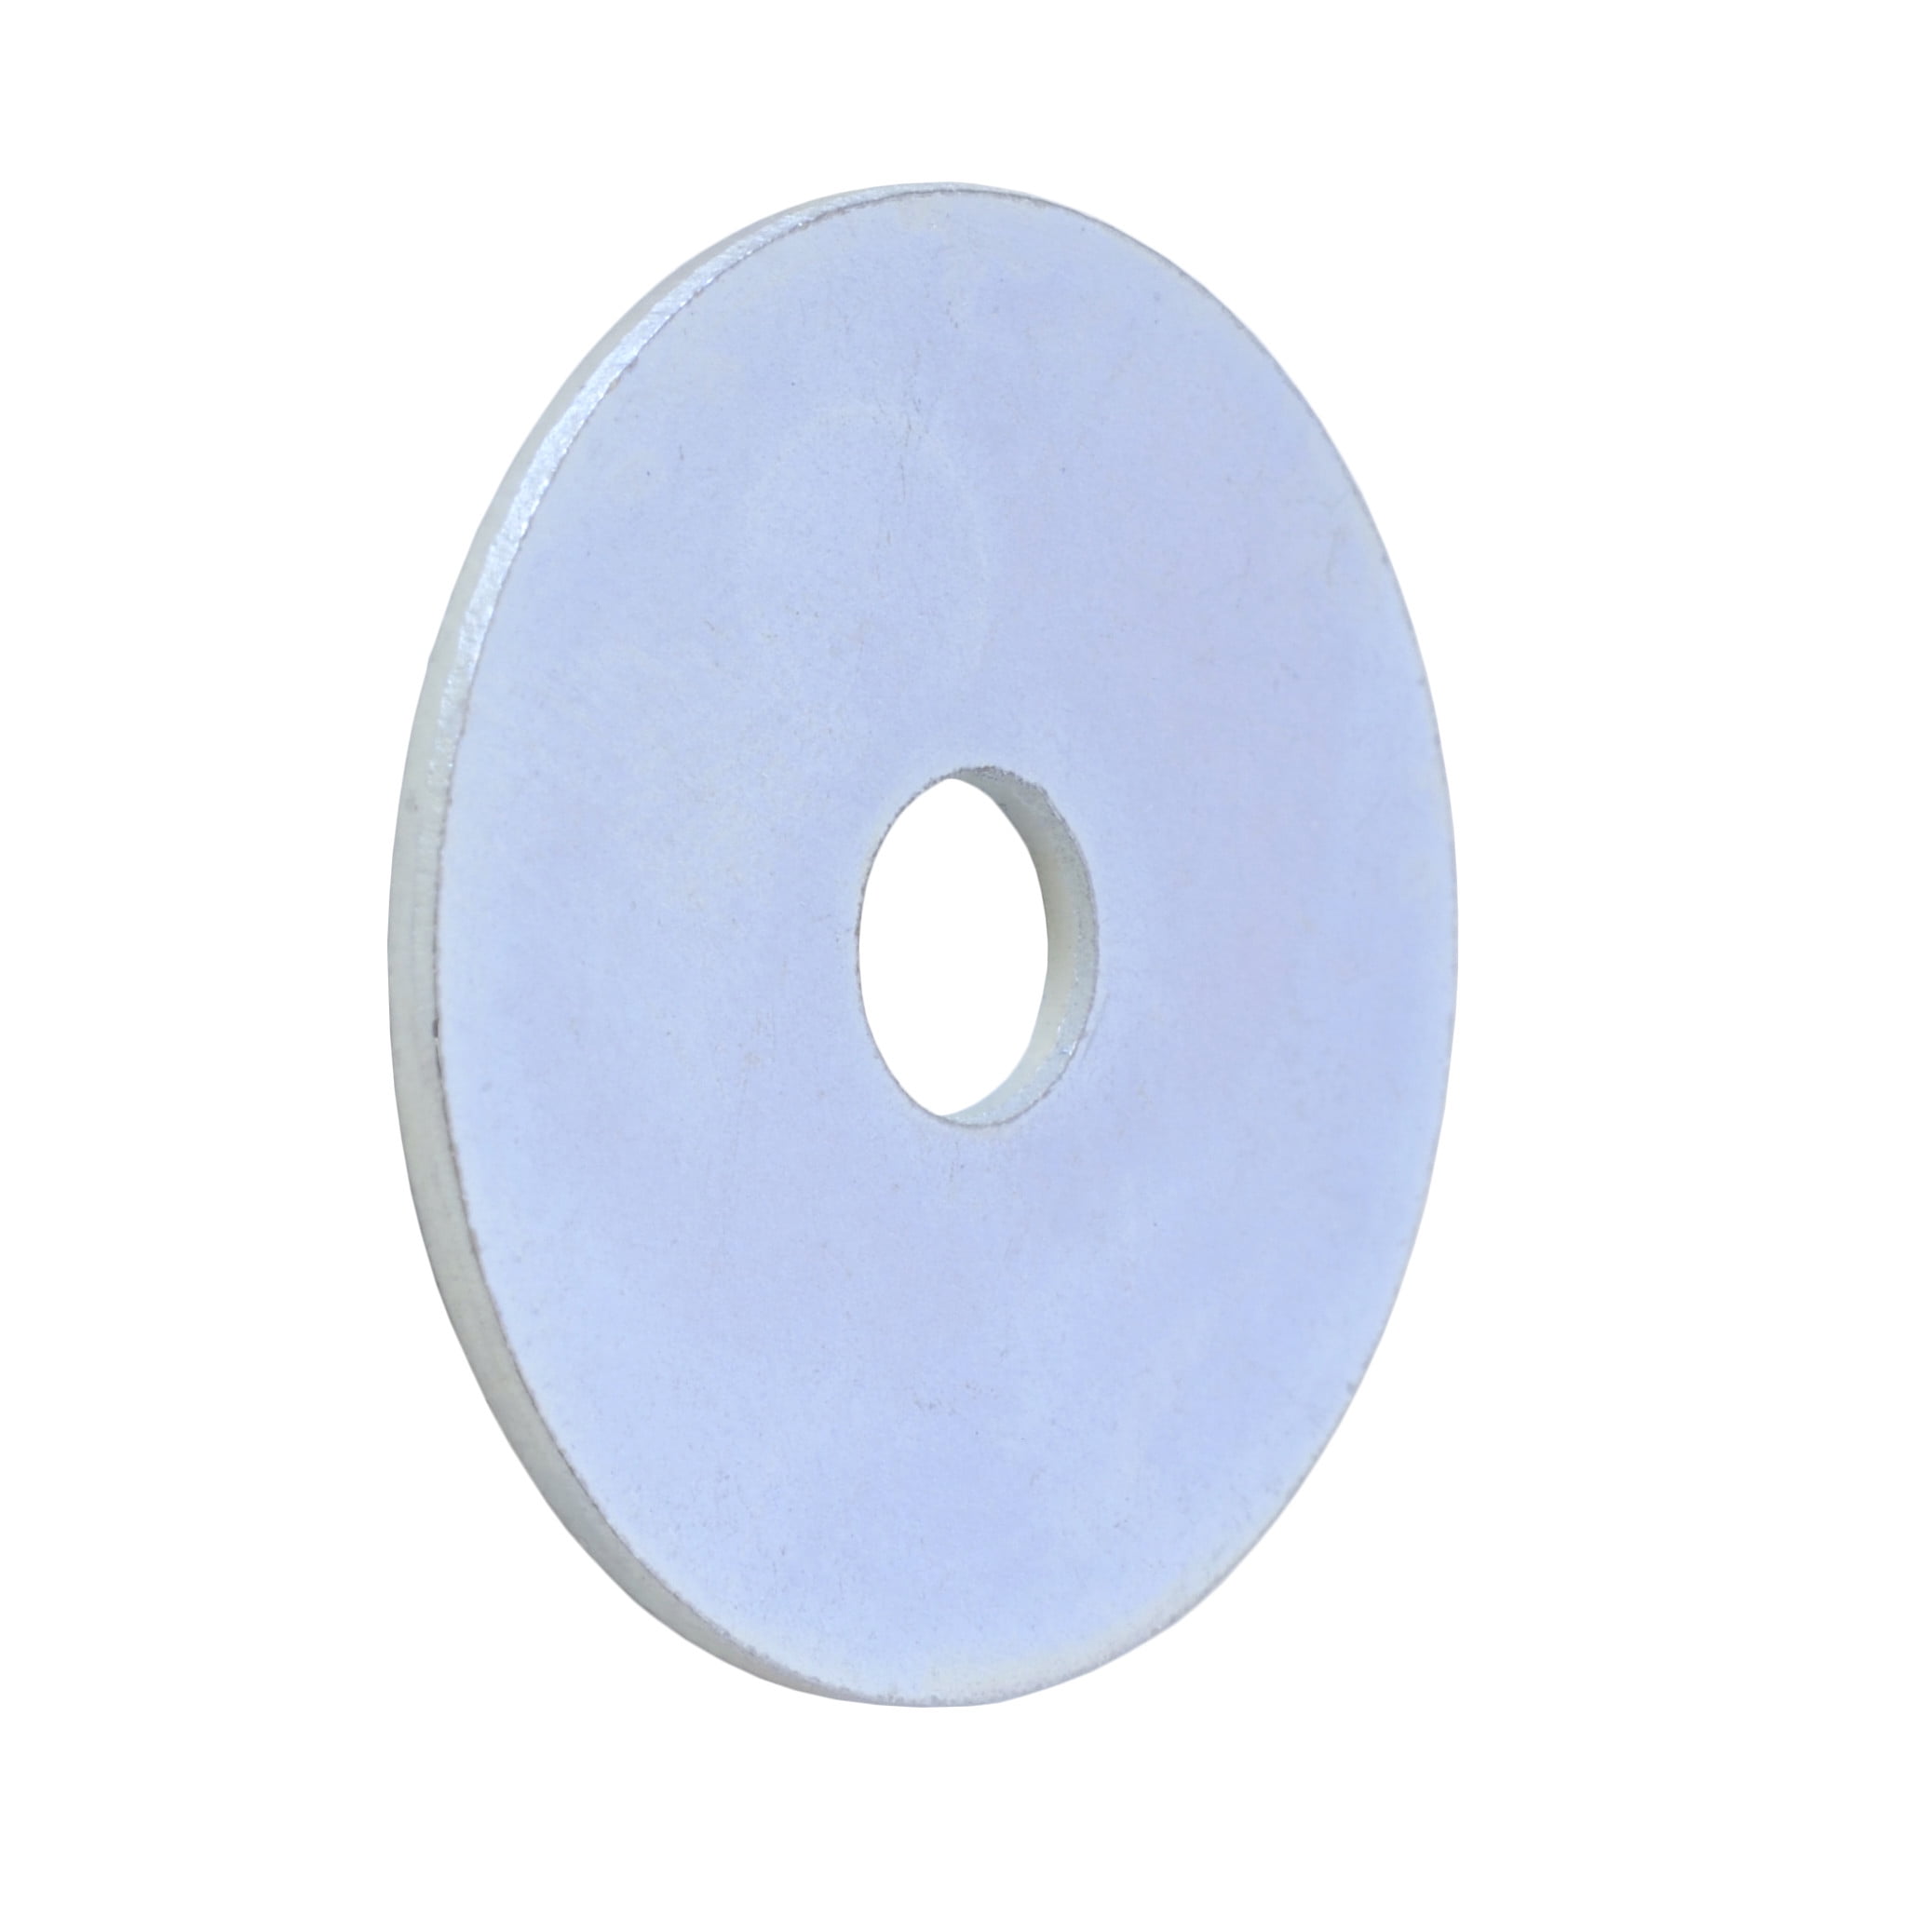 3/8 x 1 1/4 FENDER WASHER ZINC PLATED 400 PIECES 